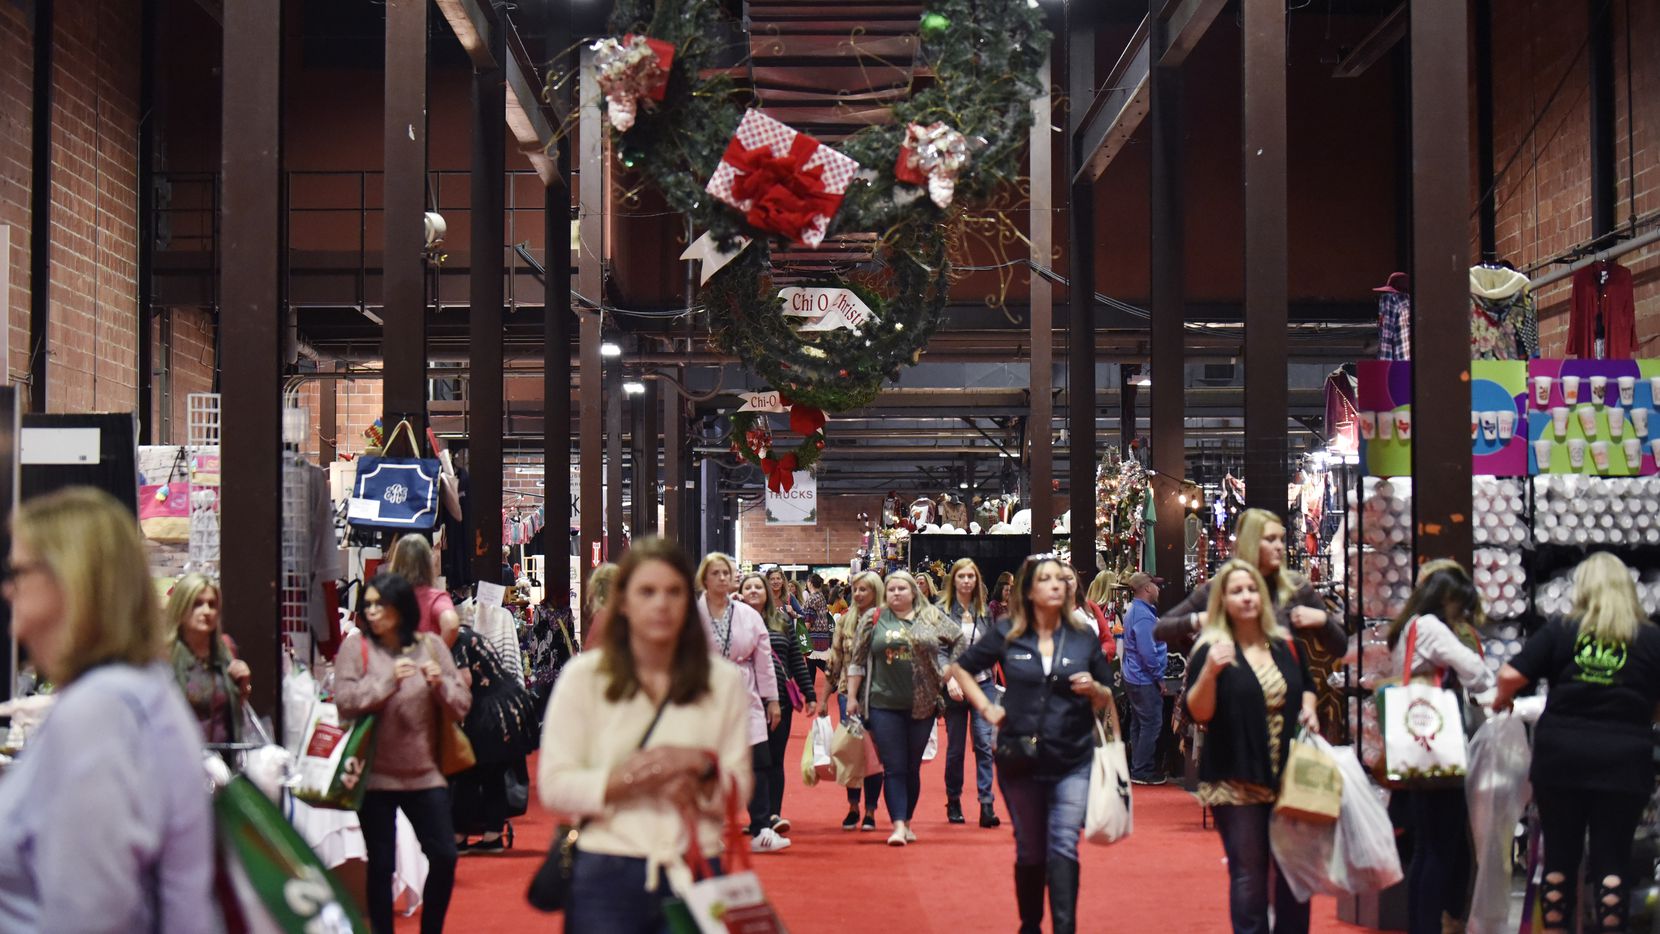 Shoppers walked the main market floor Thursday evening during the Chi Omega Christmas Market...